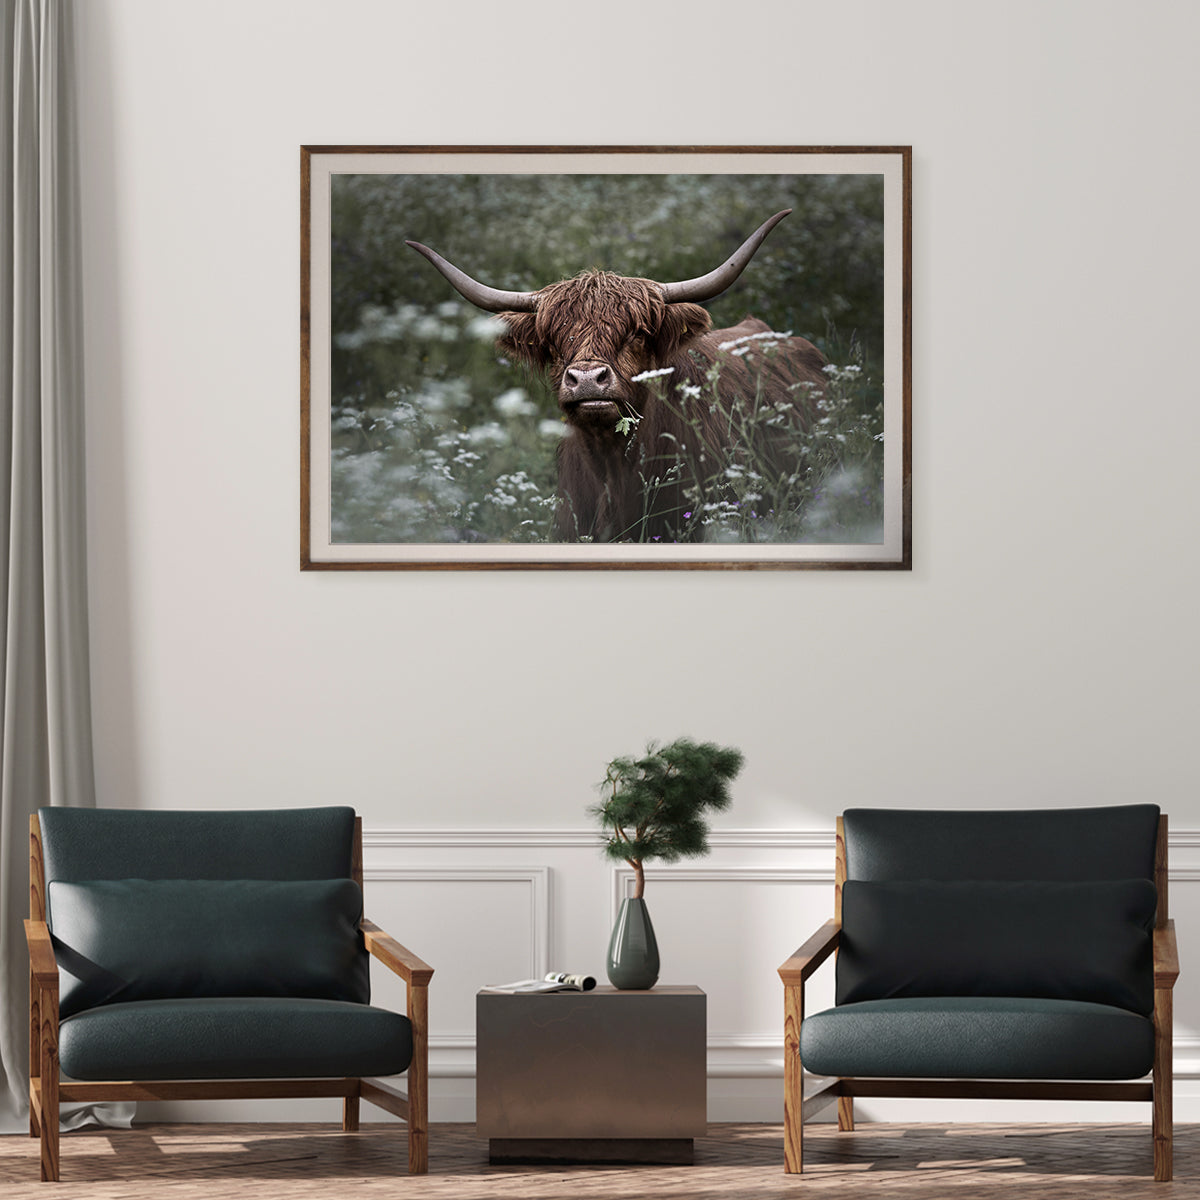 Highland Cattle Cow in Green Flowers Field Posters For Wall Decor-Horizontal Posters NOT FRAMED-CetArt-10″x8″ inches-CetArt